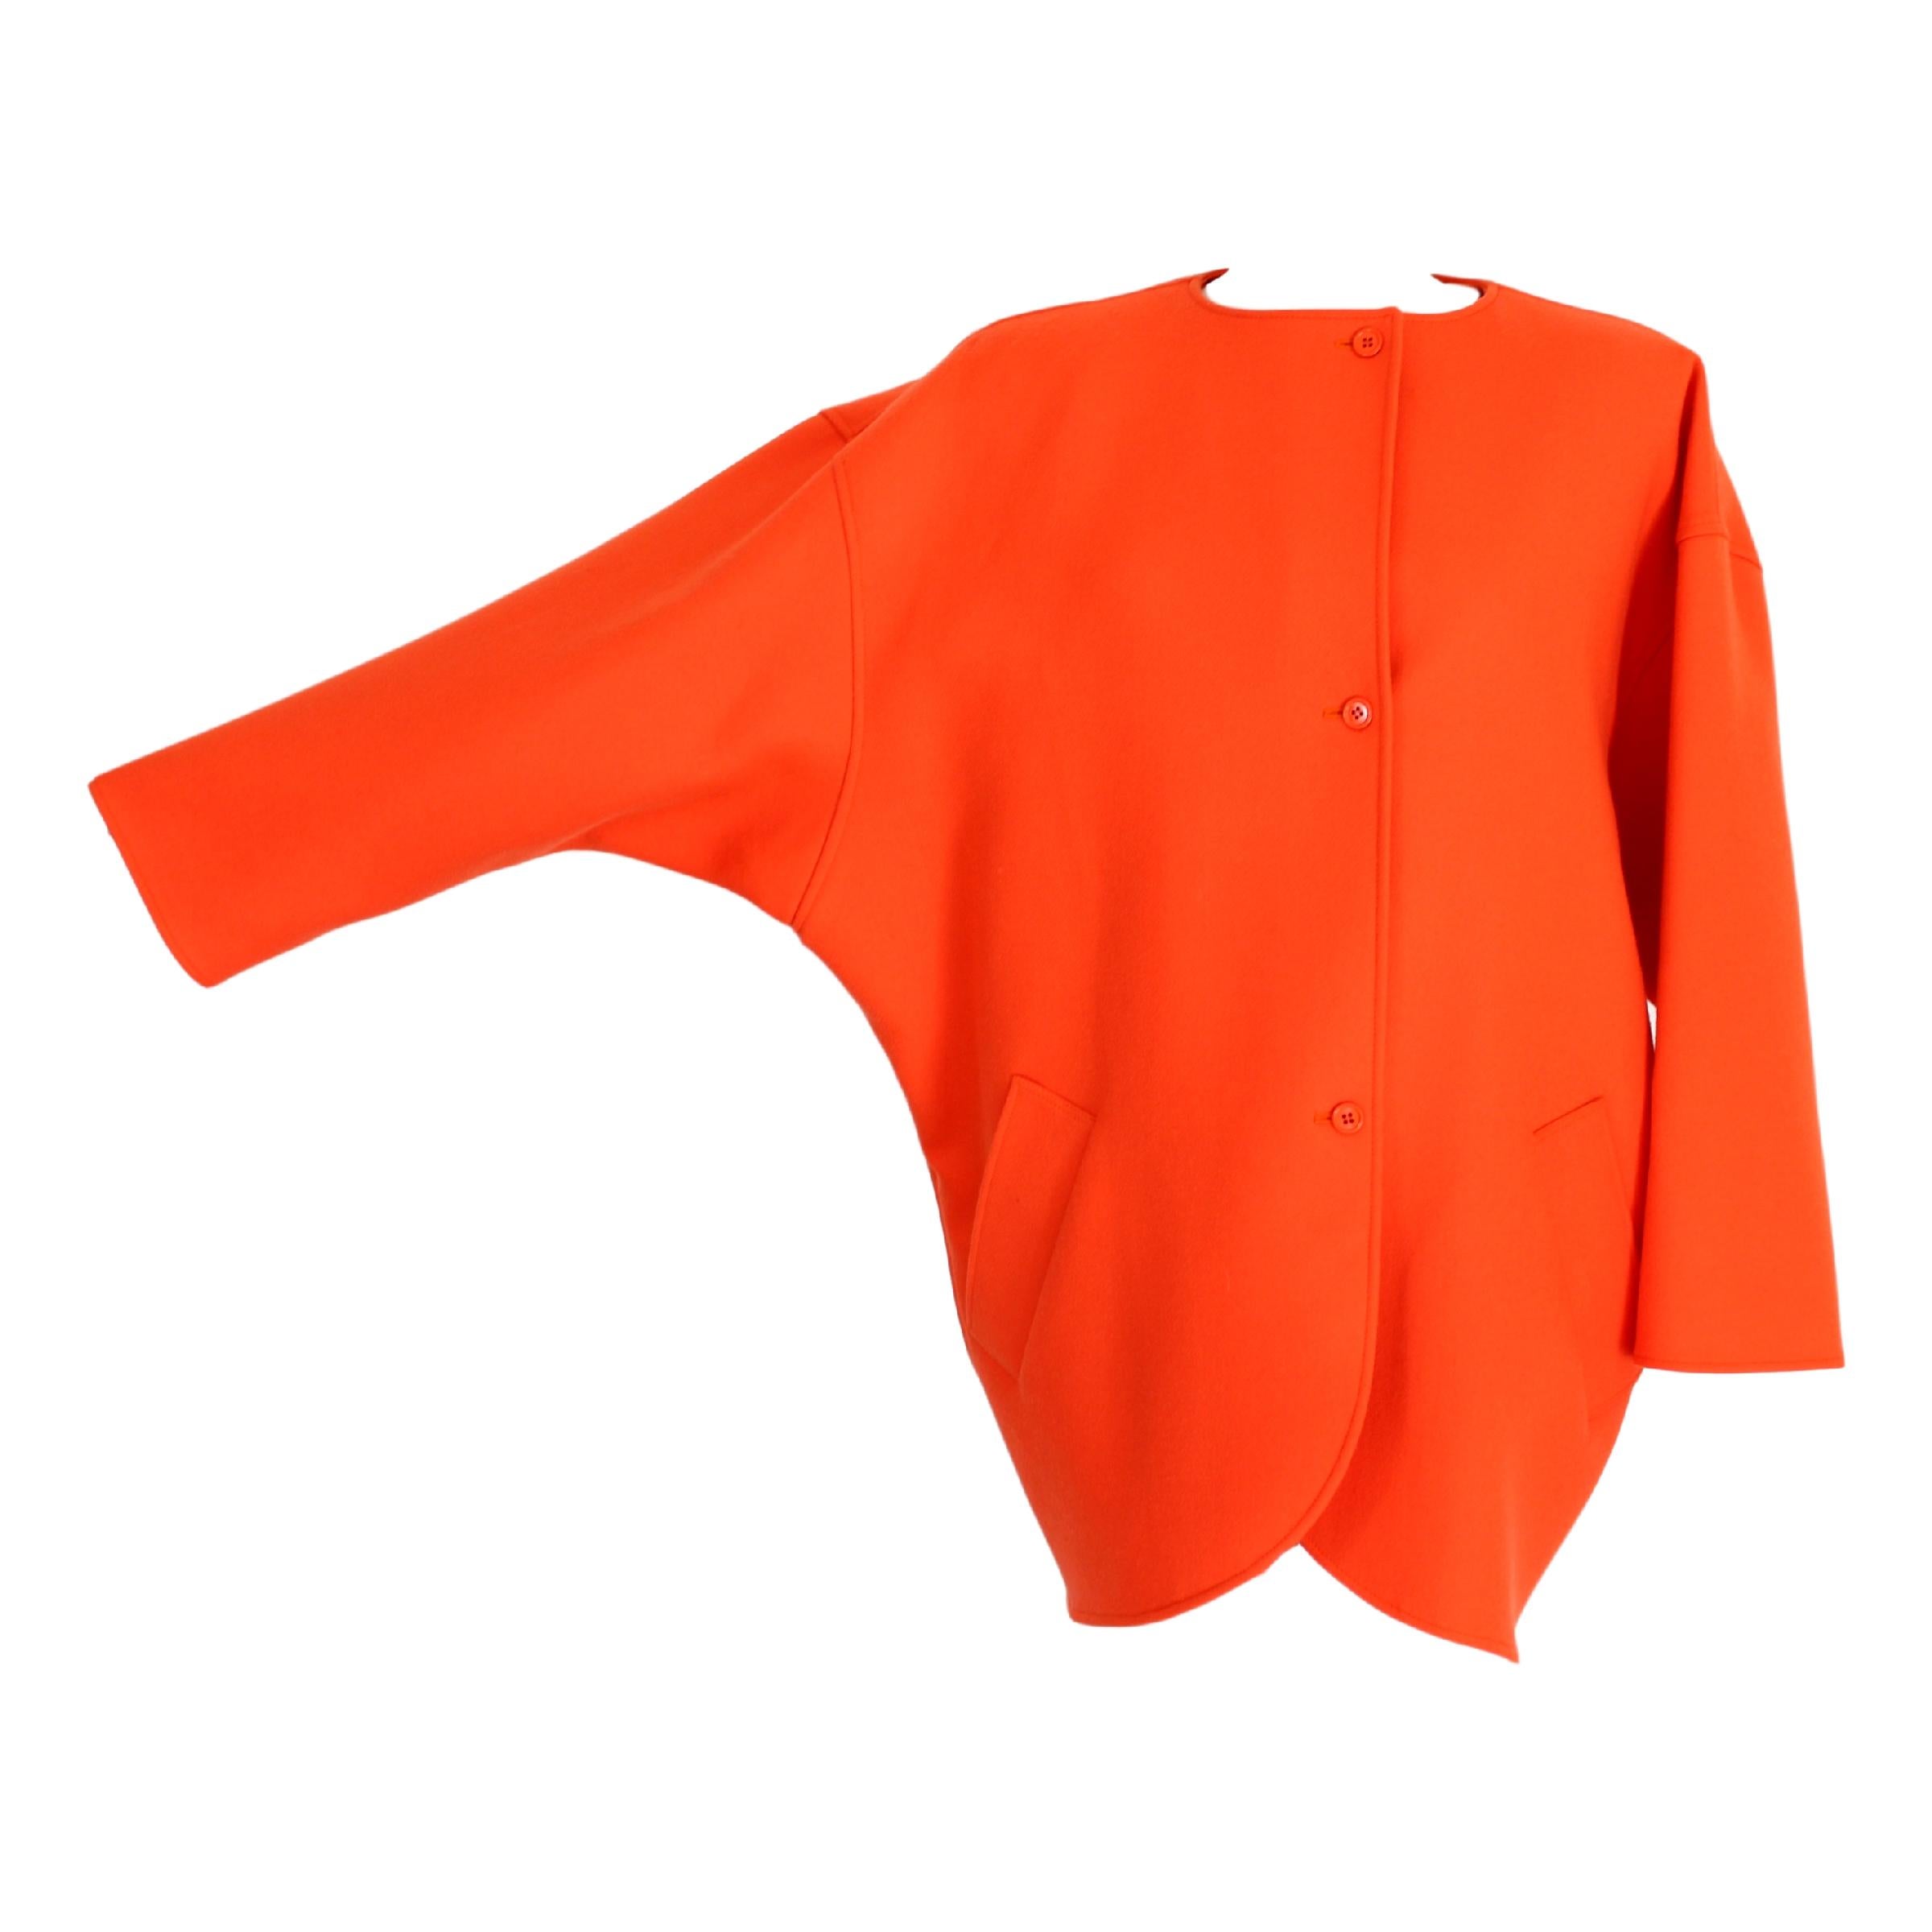 Emanuel Ungaro vintage 80s women's coat. Orange poncho model with batwing sleeve, 100% wool. Crewneck, button closure, two side pockets. Made in Italy. Excellent vintage condition.

Size: 42 It 8 Us 10 Uk

Shoulder: 44 cm
Bust/Chest: 76 cm
Sleeve: